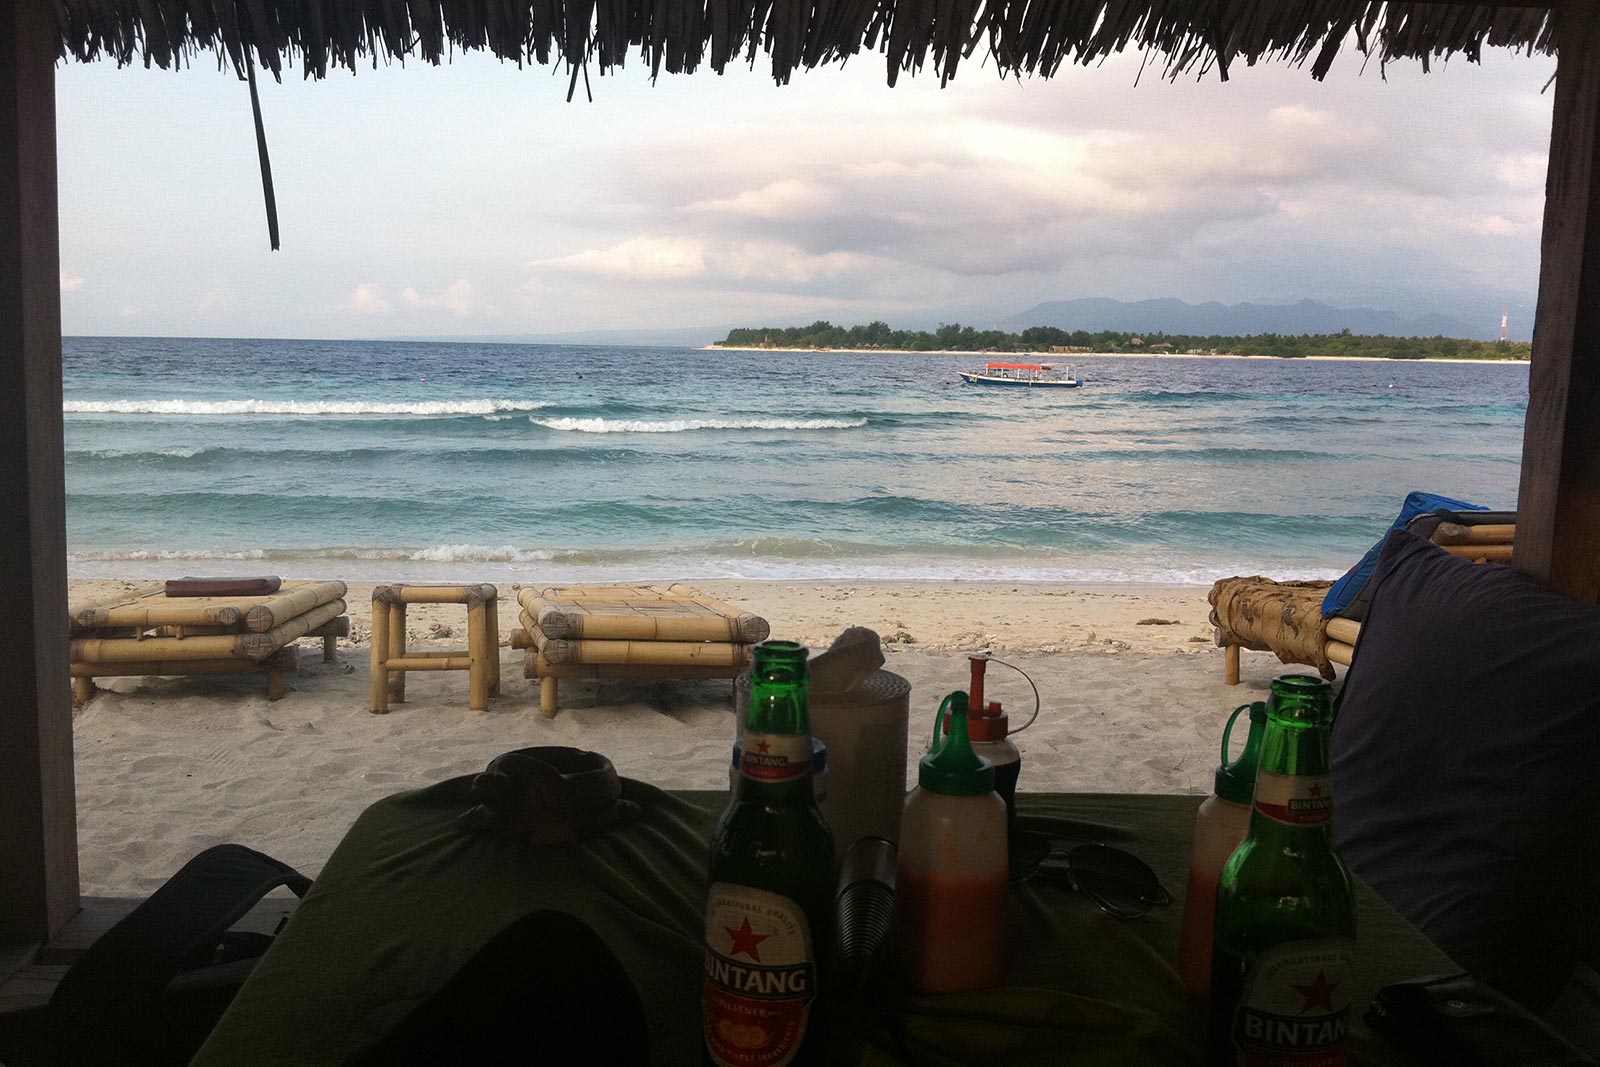 Gili beach in first taste of Asia. My first taste of Asia